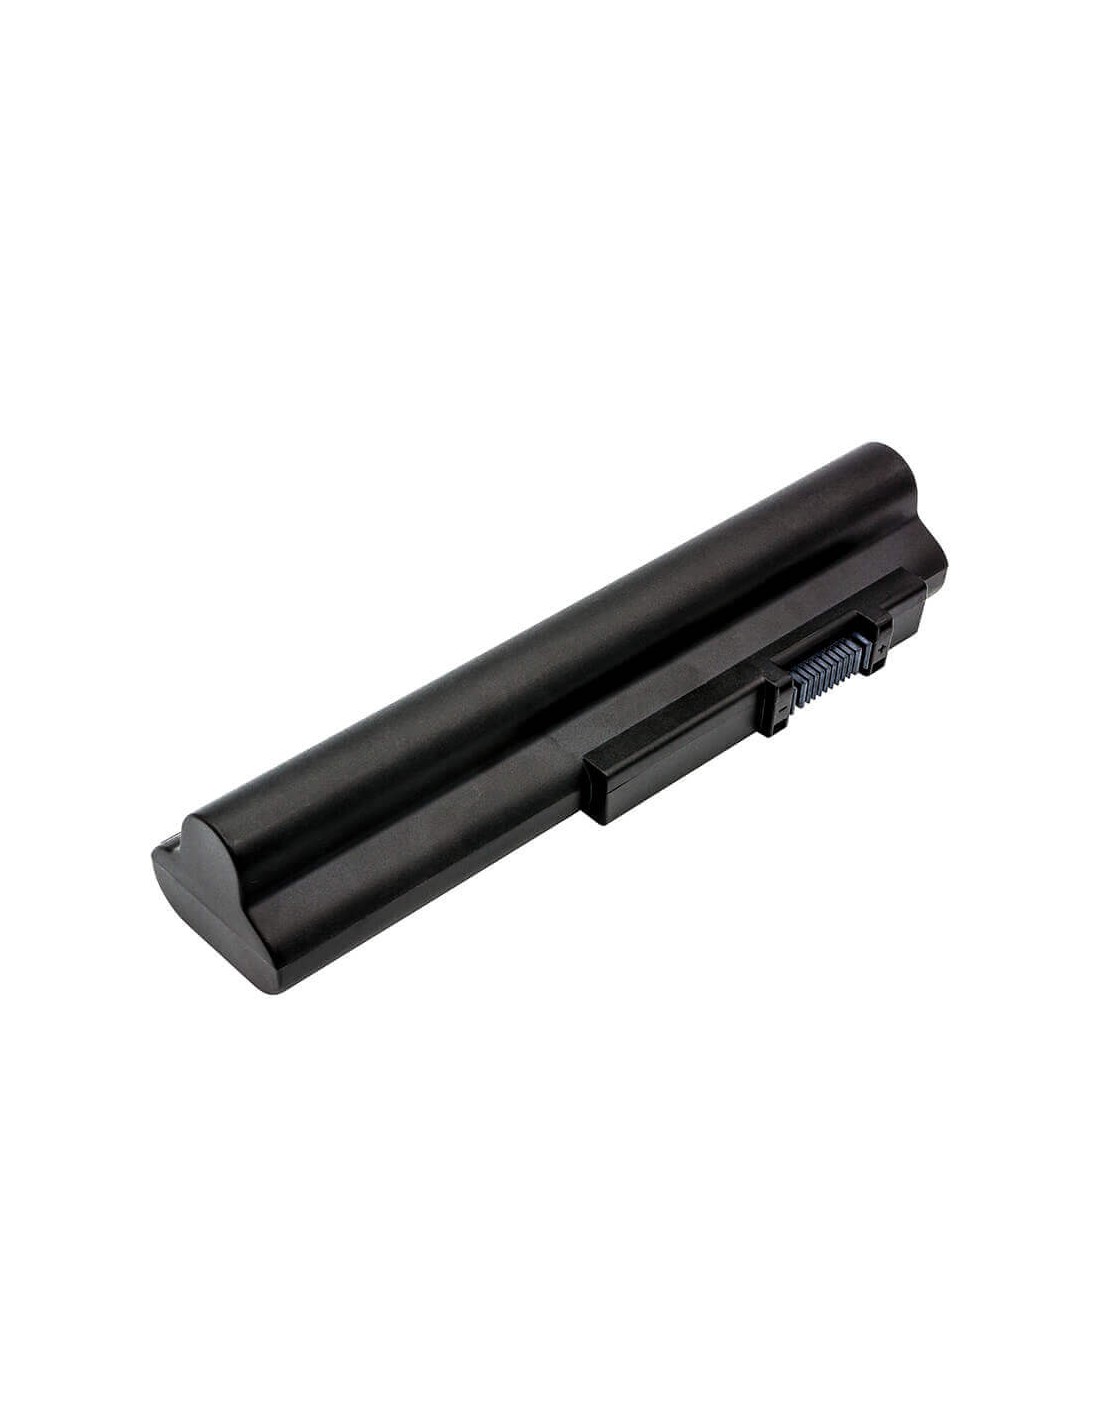 Battery for Asus N50, N50a, N50e 11.1V, 7200mAh - 79.92Wh